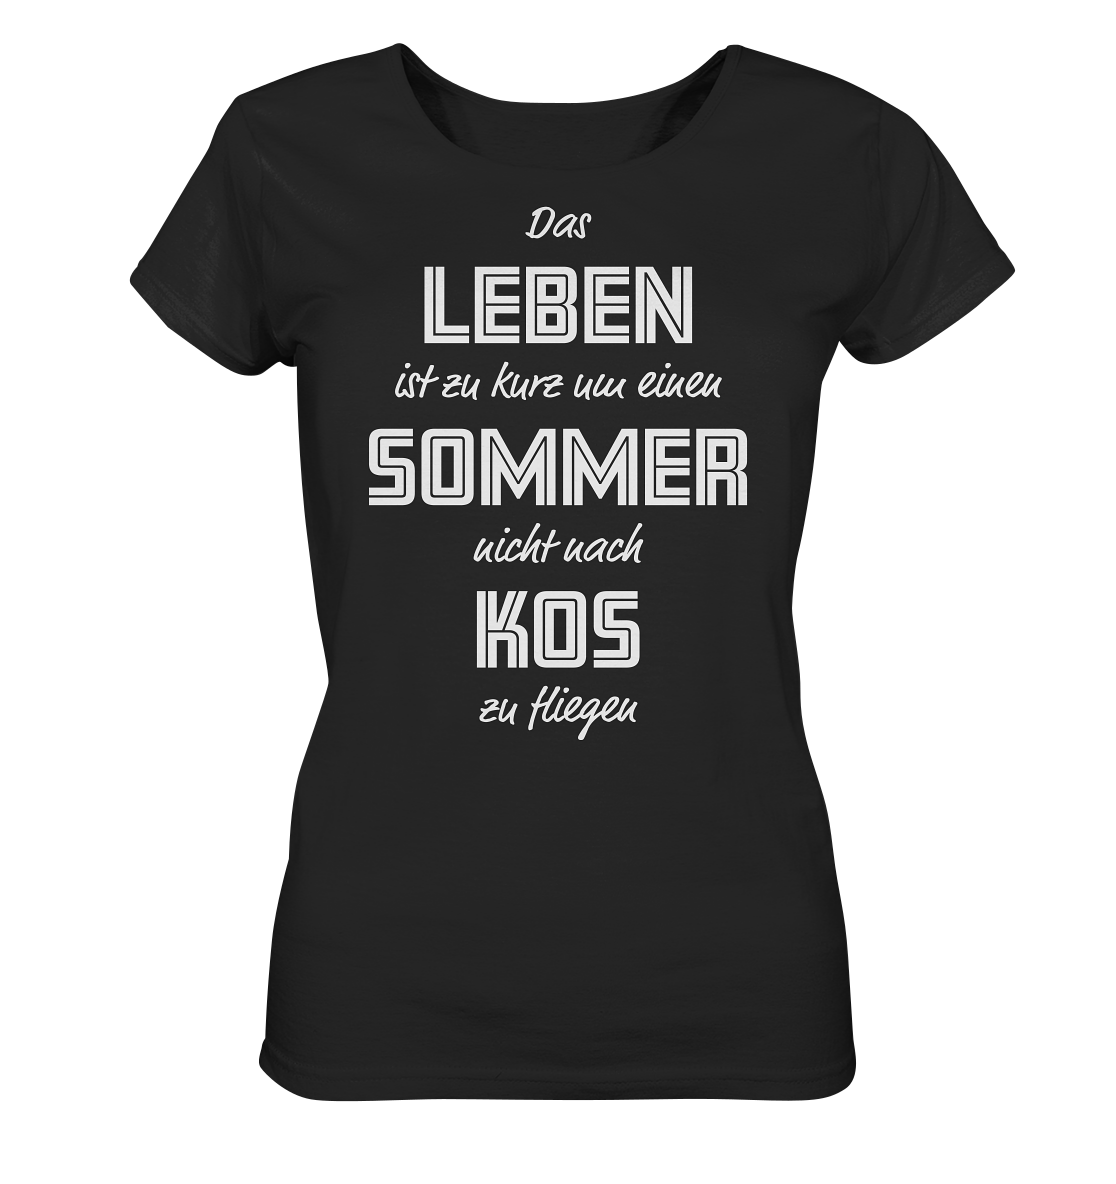 Life is too short not to fly to Kos for a summer - Ladies Organic Shirt